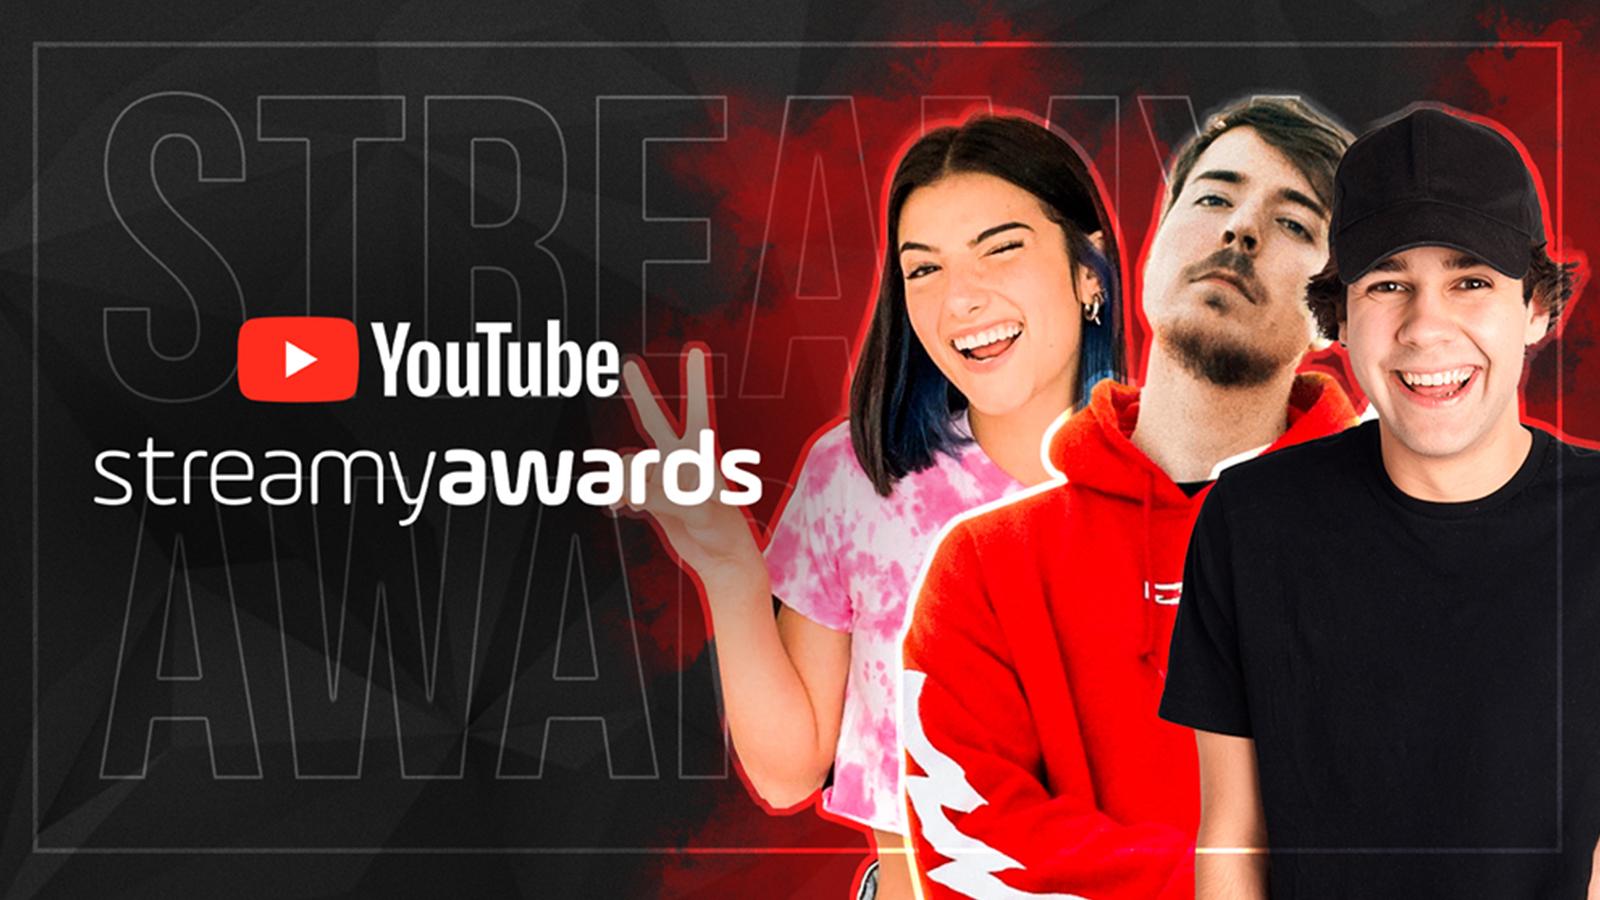 Mr Beast, David Dobrik, and Charli D'Amelio pose on a graphic featuring the Streamy Awards logo.